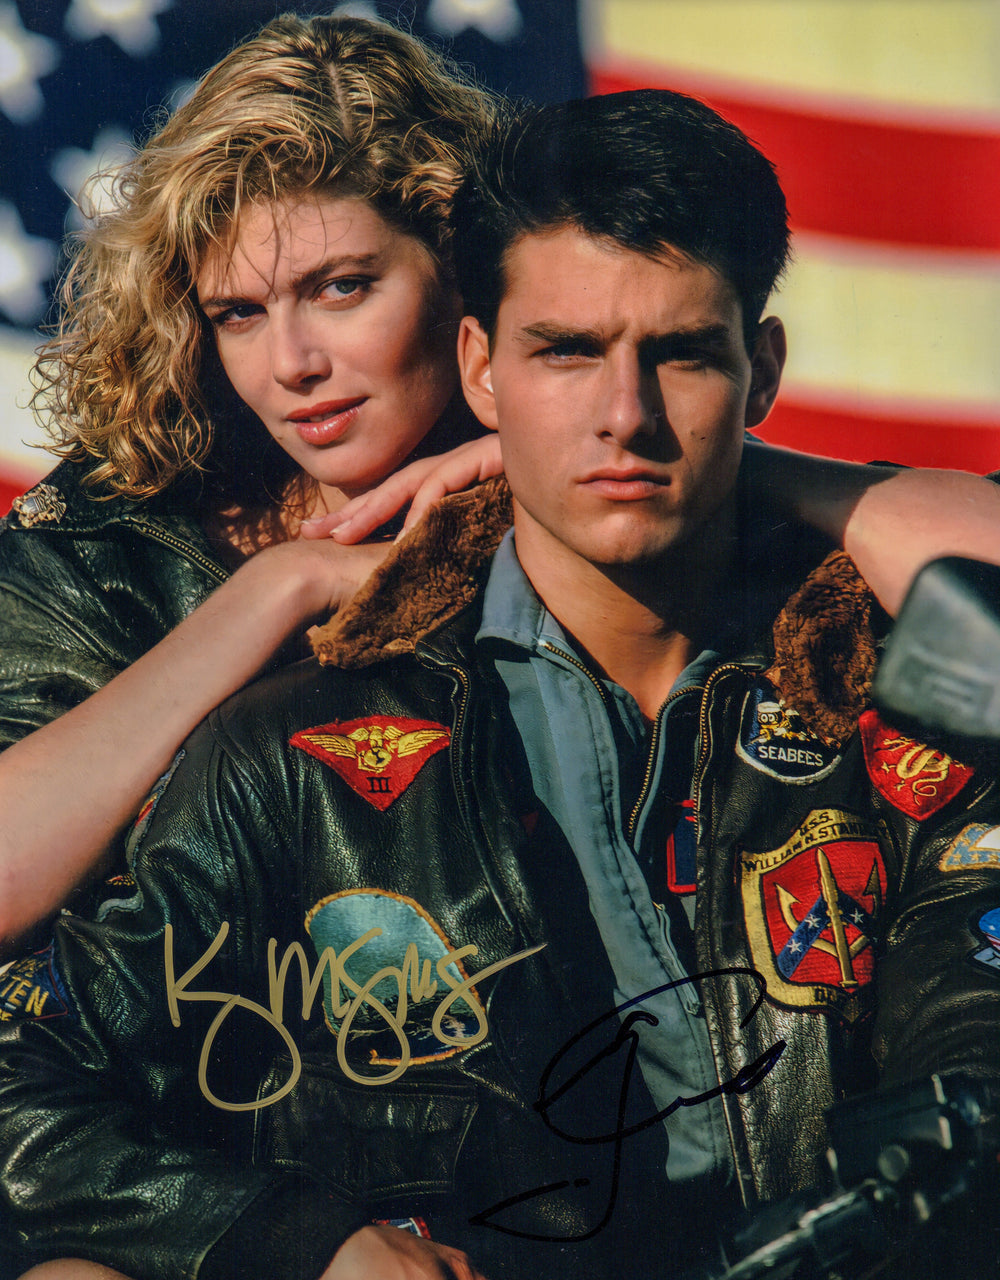 Tom Cruise as Maverick with Kelly McGillis as Charlie in Top Gun Signed 11x14 Photo